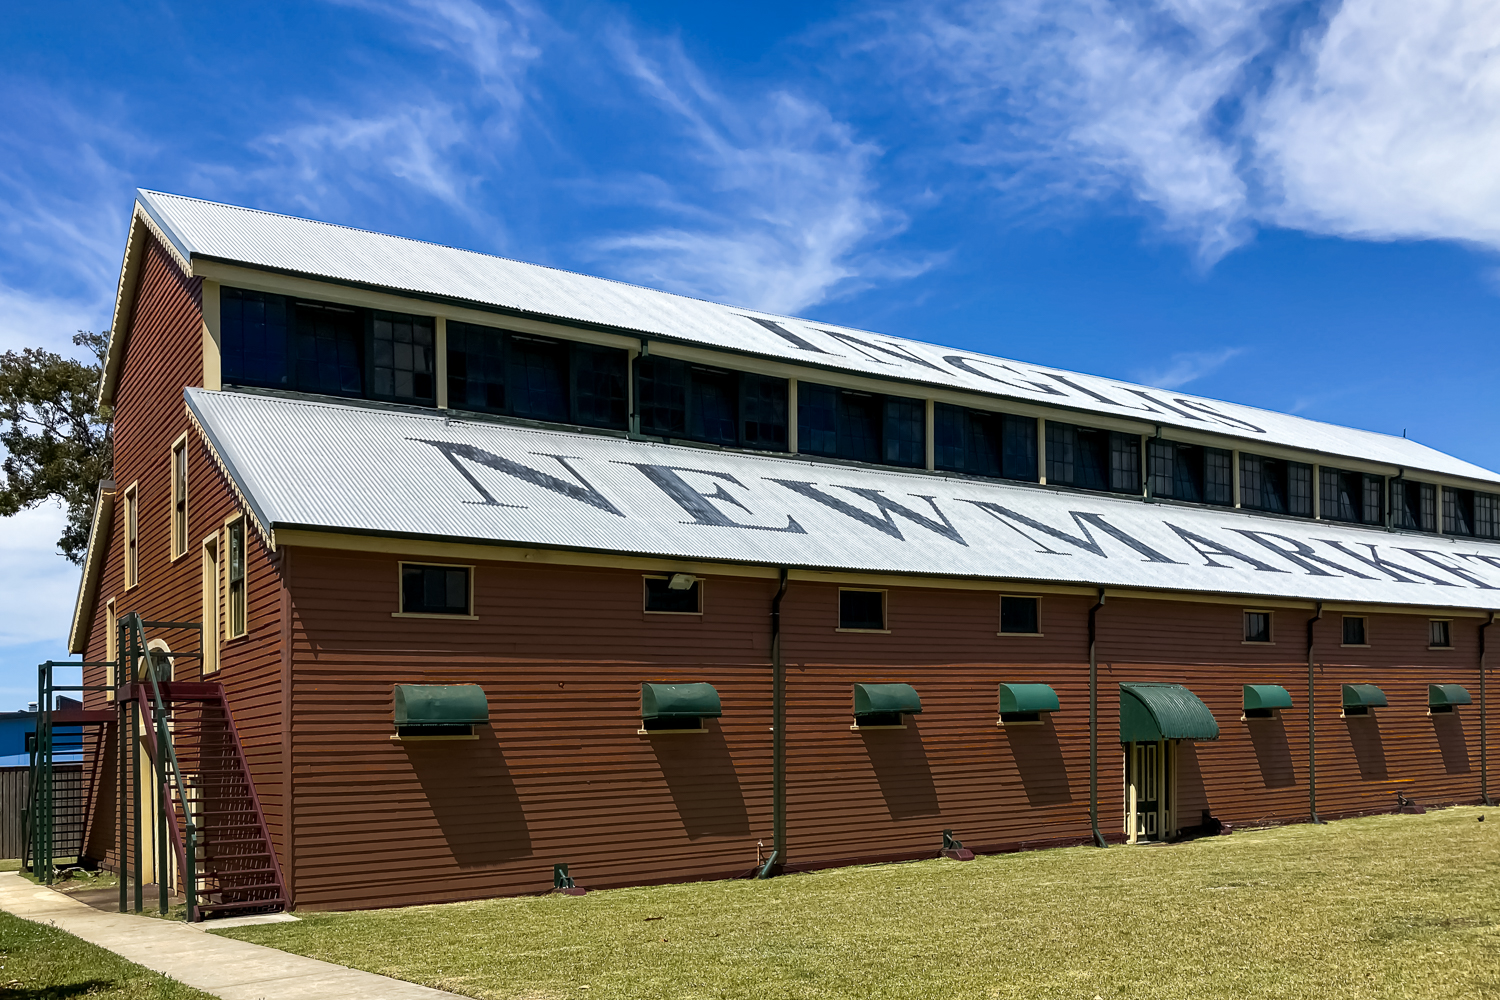 Large painted wooden building with an iron roof and the words INGLIS NEWMARKET on the roof